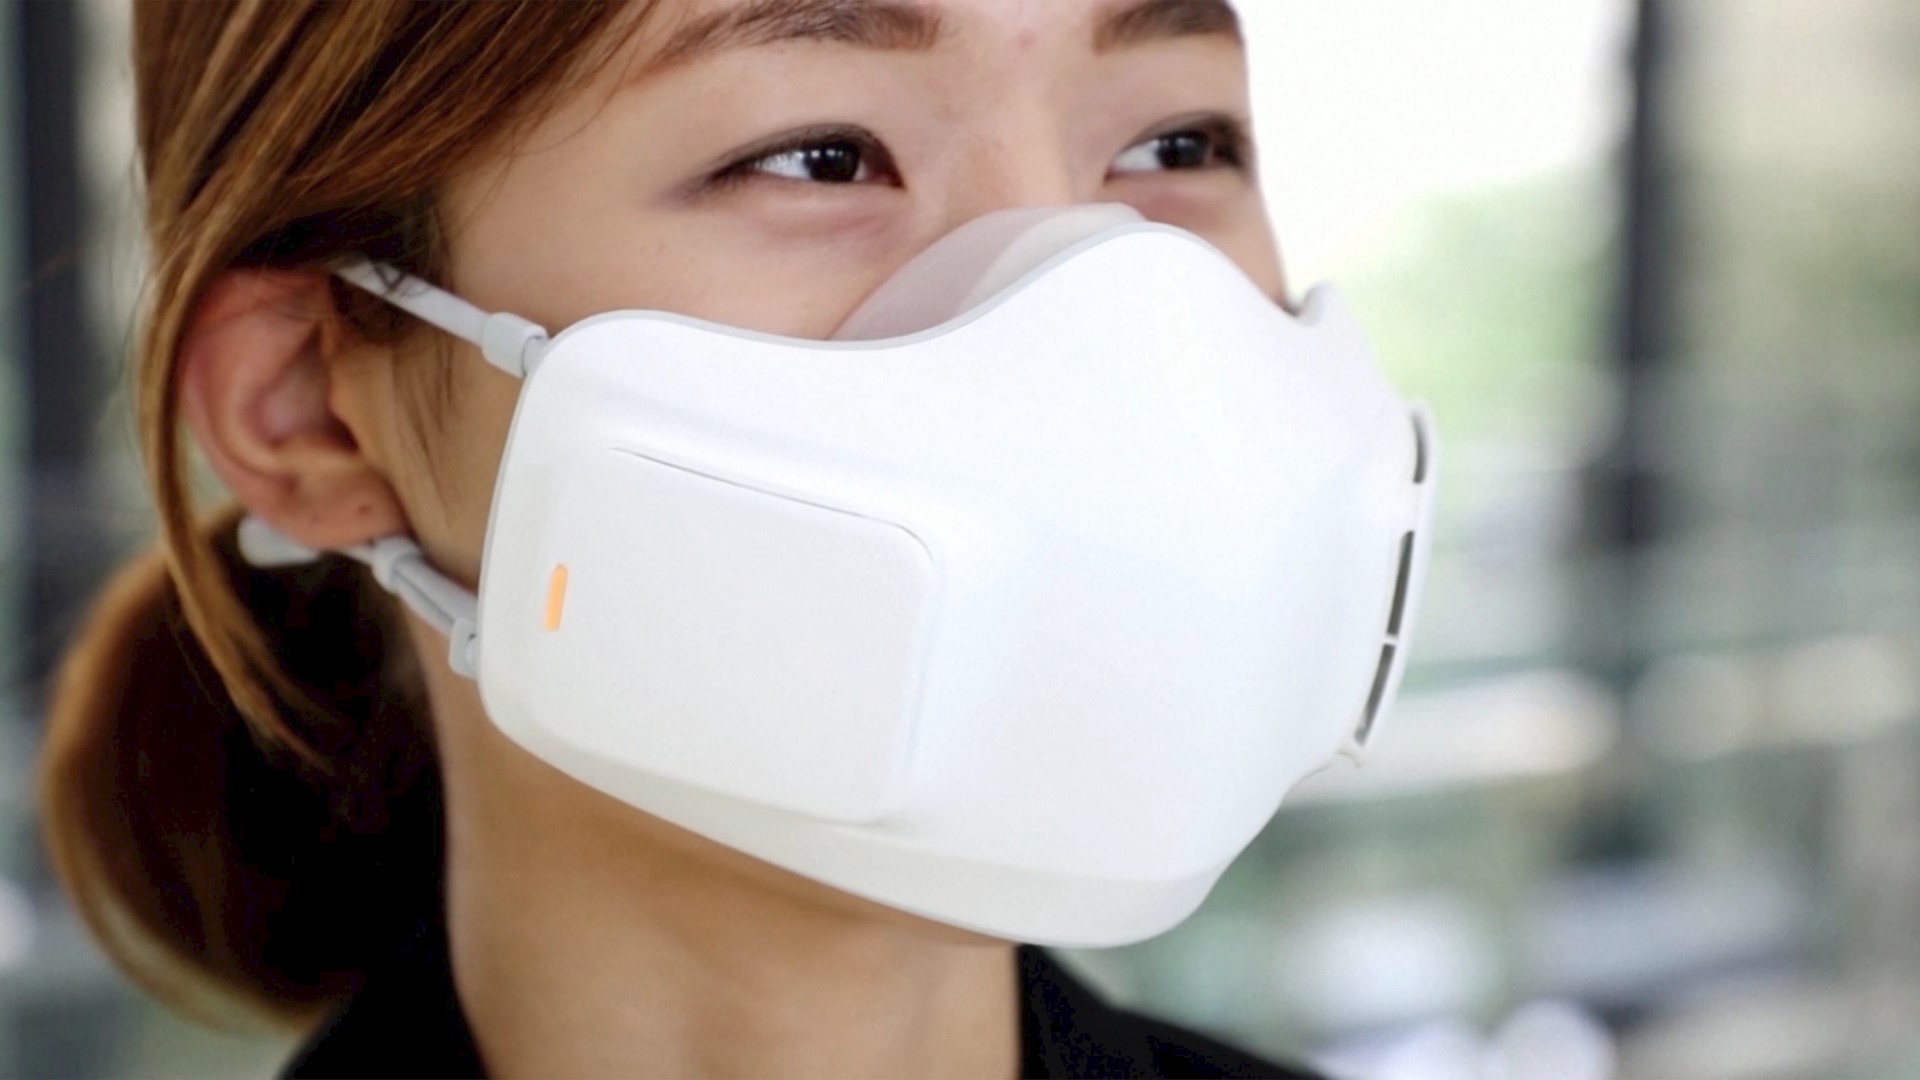 LG's new face mask brings comfort and functionality to wearers. Veuer's Tony Spitz has the details.